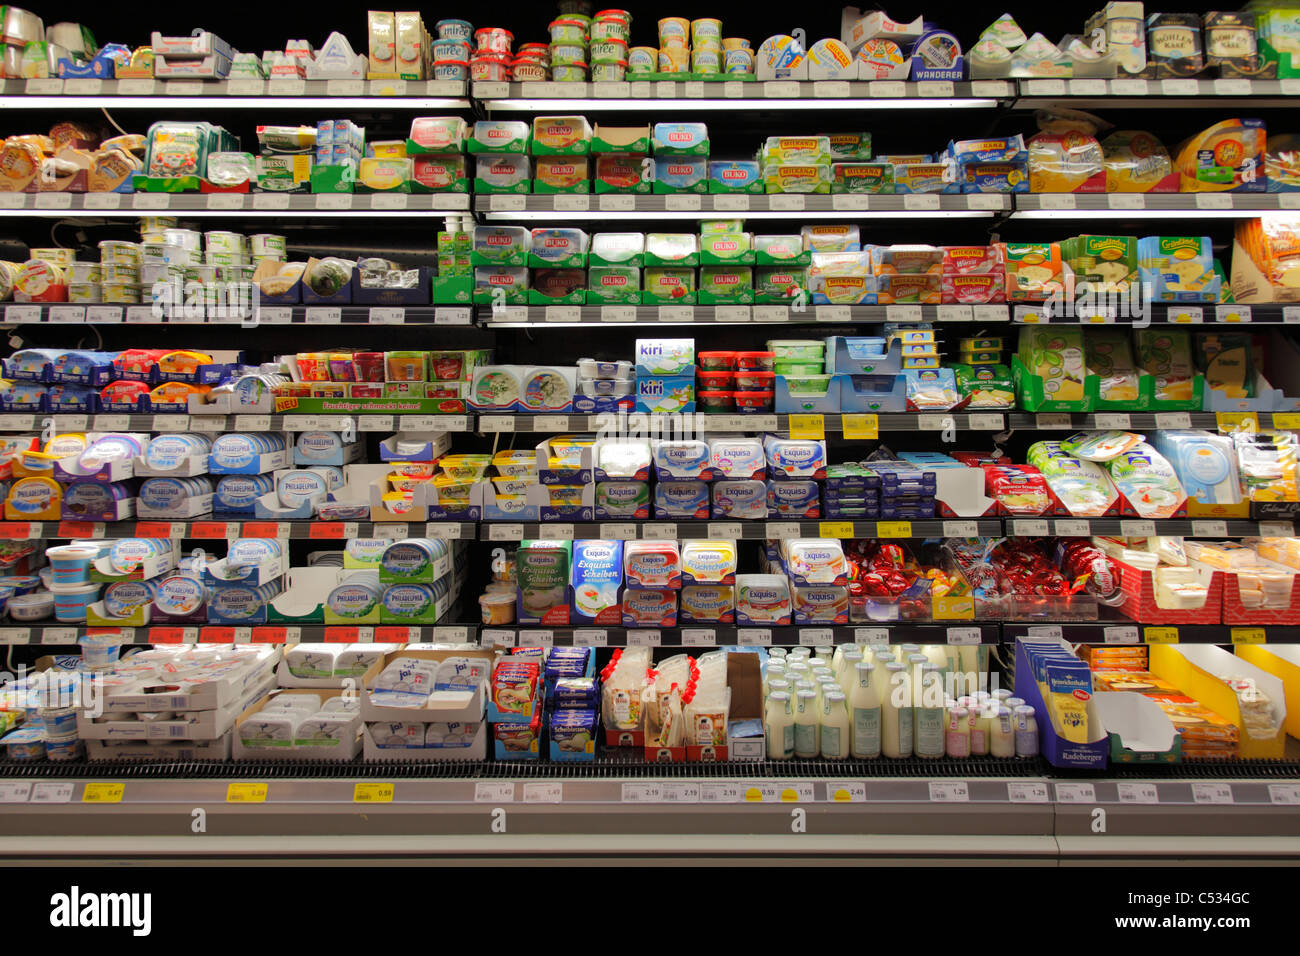 dairy products in a refrigerated shelf in a supermarket Stock Photo